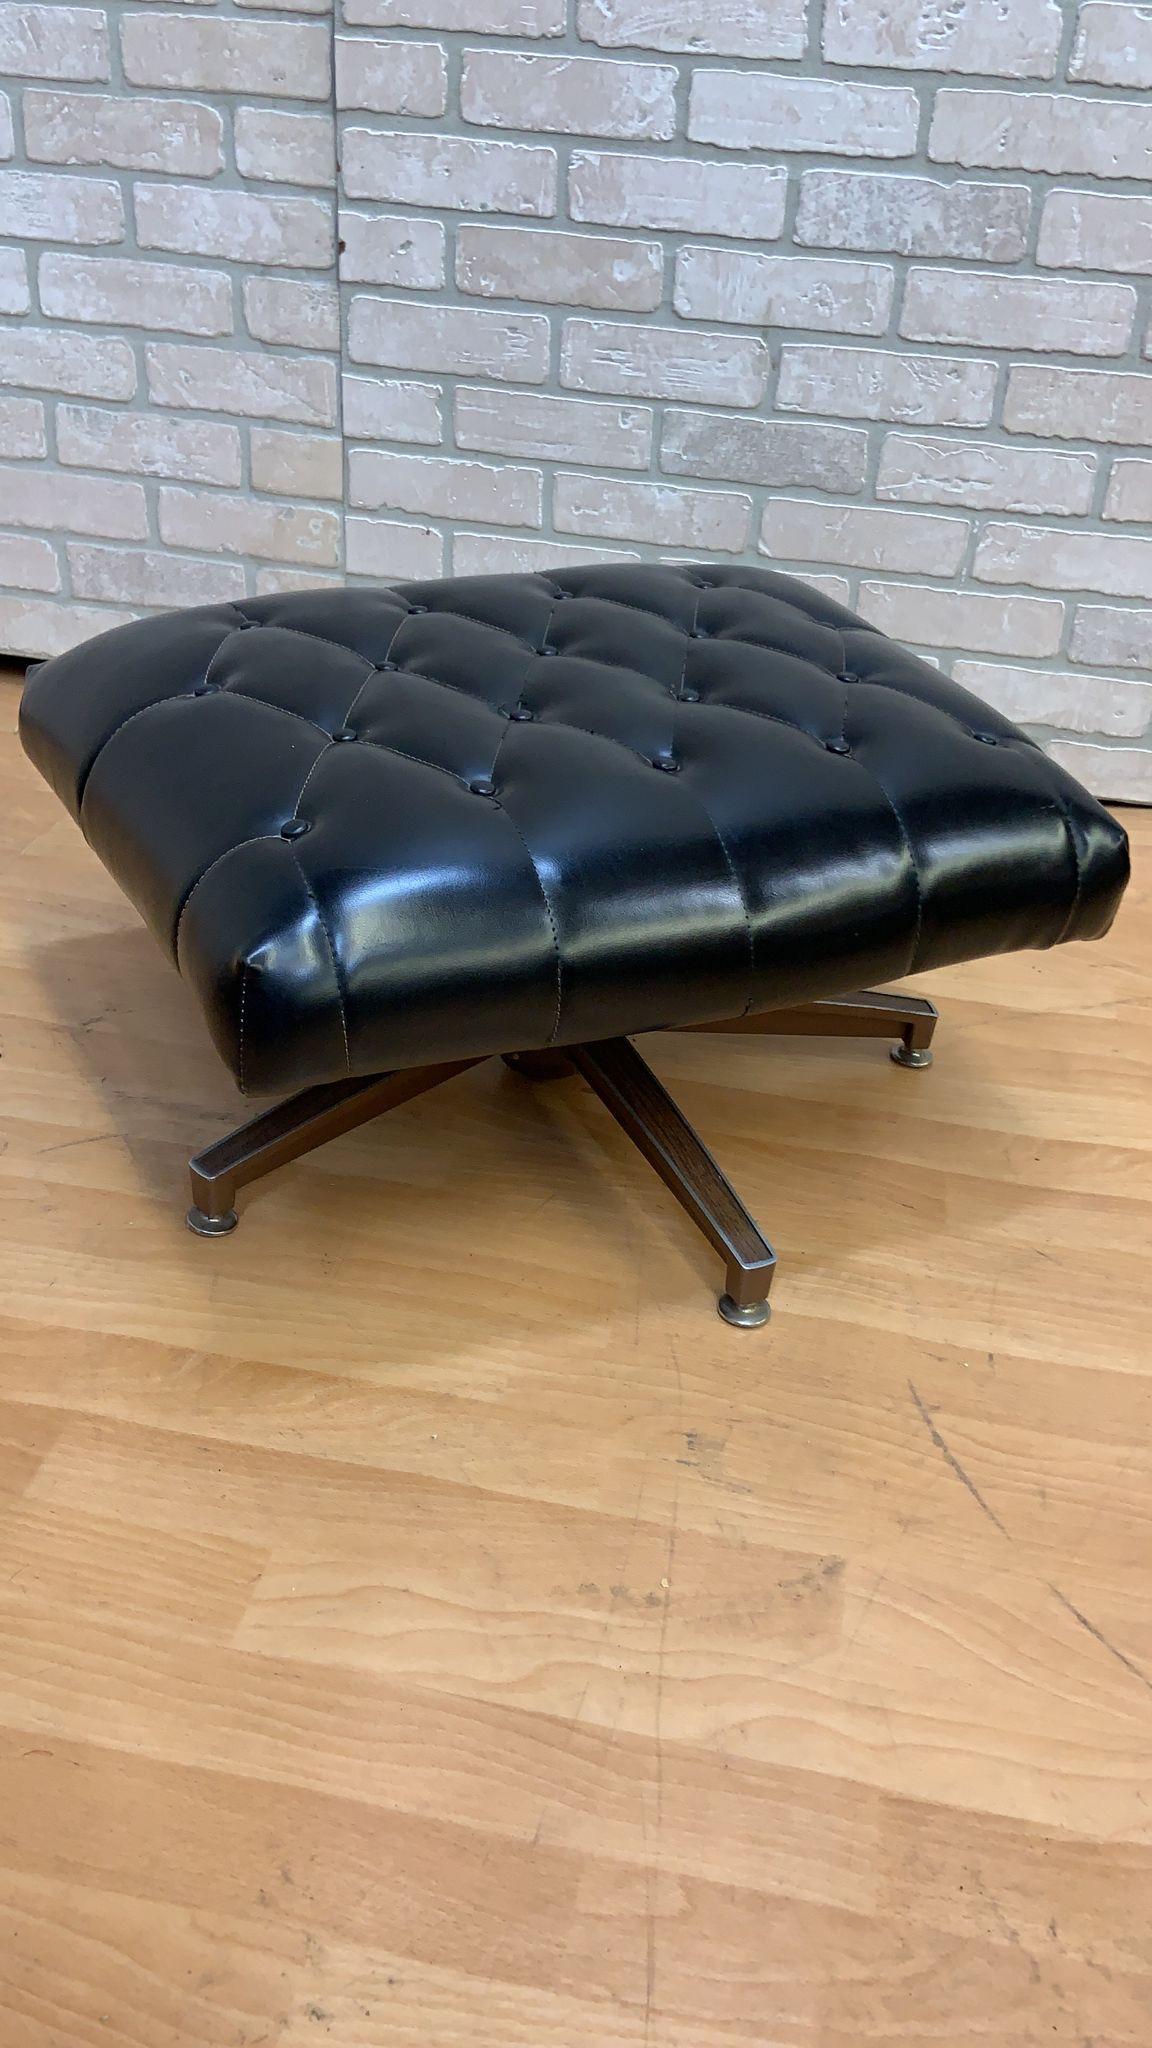 Mid Century Modern George Mulhauser Mr. Chair Lounge & Ottoman for Plycraft in Black Leatherette

This is a an amazing timeless chair and ottoman by designer George Mulhauser for Plycraft. This black leatherette lounge chair has 5 star shape legs